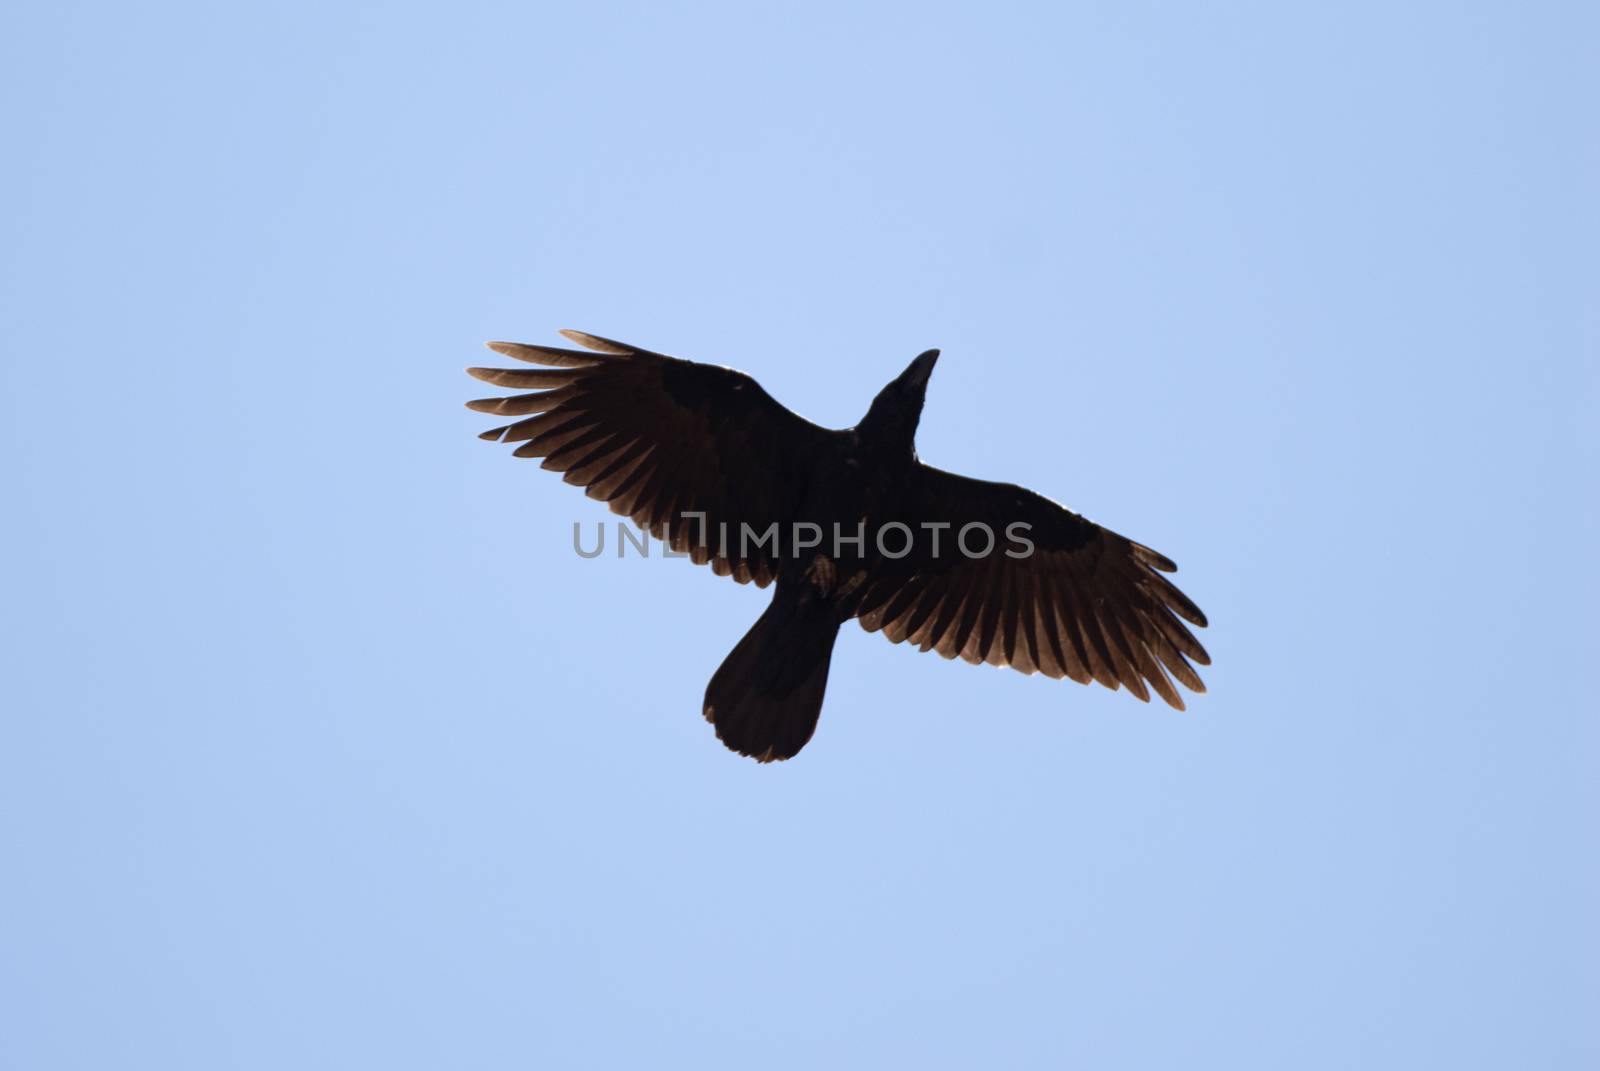 Raven - Corvus corax, flying against the blue sky by jalonsohu@gmail.com